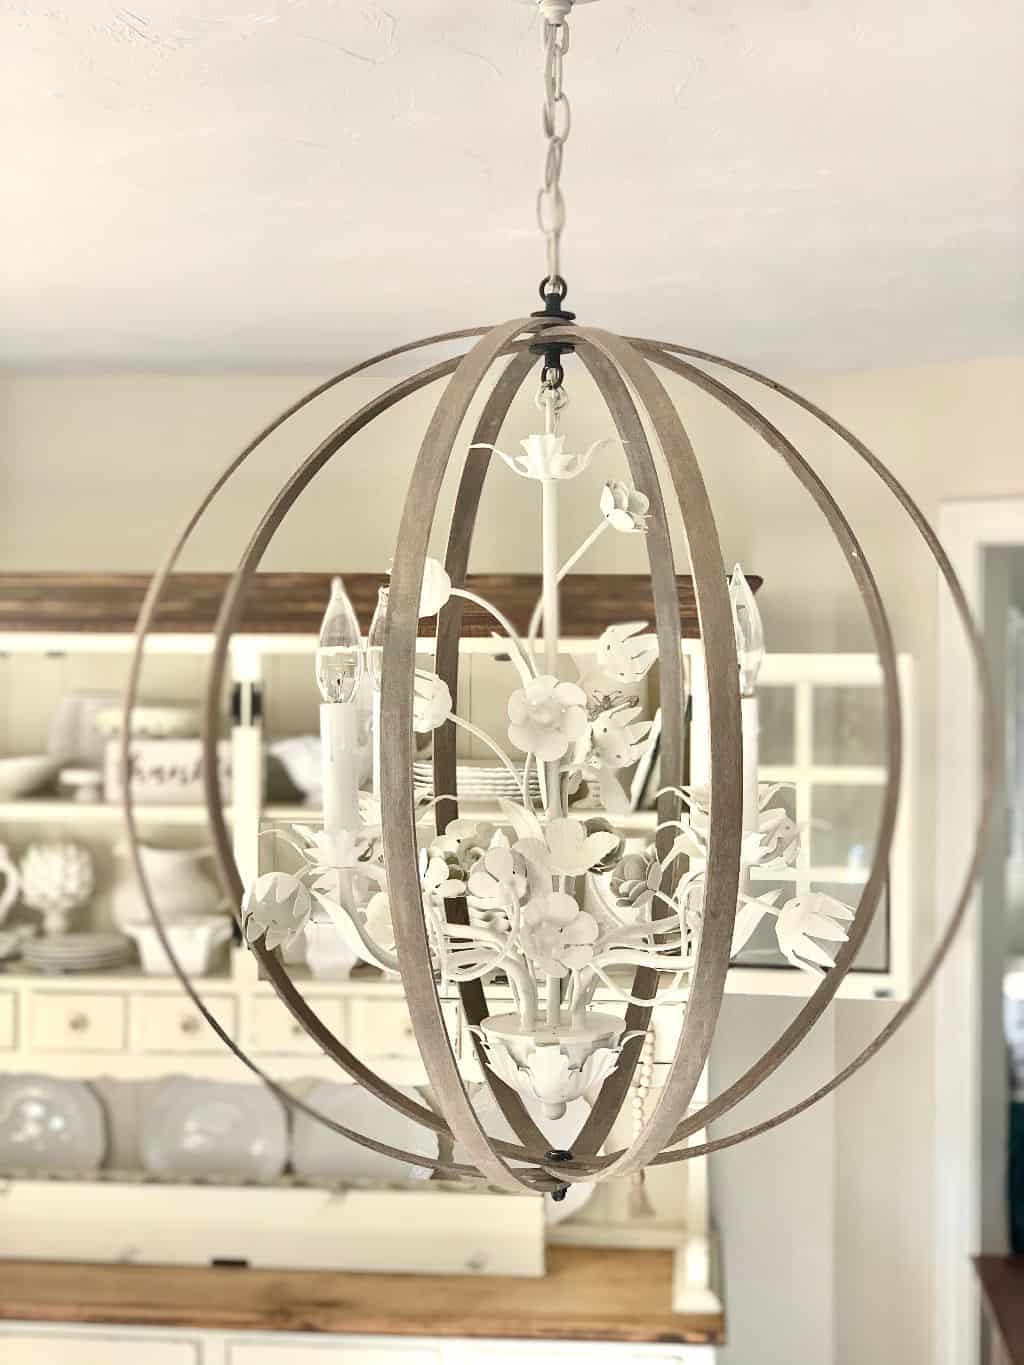 Recycling Lighting using Embroidery Hoops